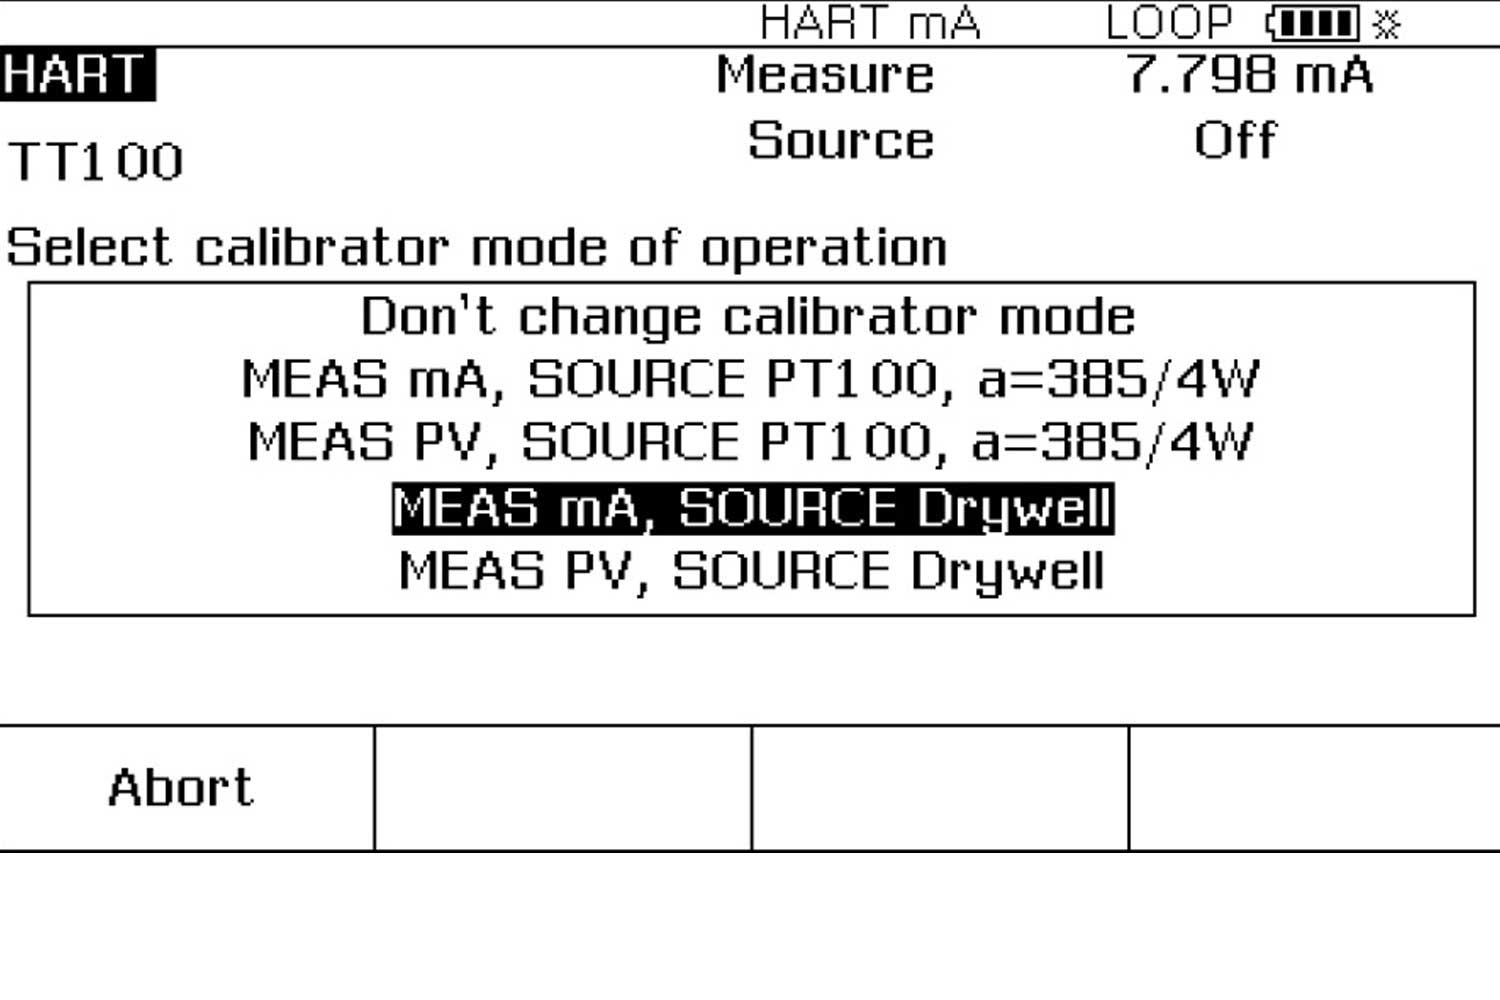 Documenting Process Calibrator Screen Showing Selection of the Drywell to Measure mA